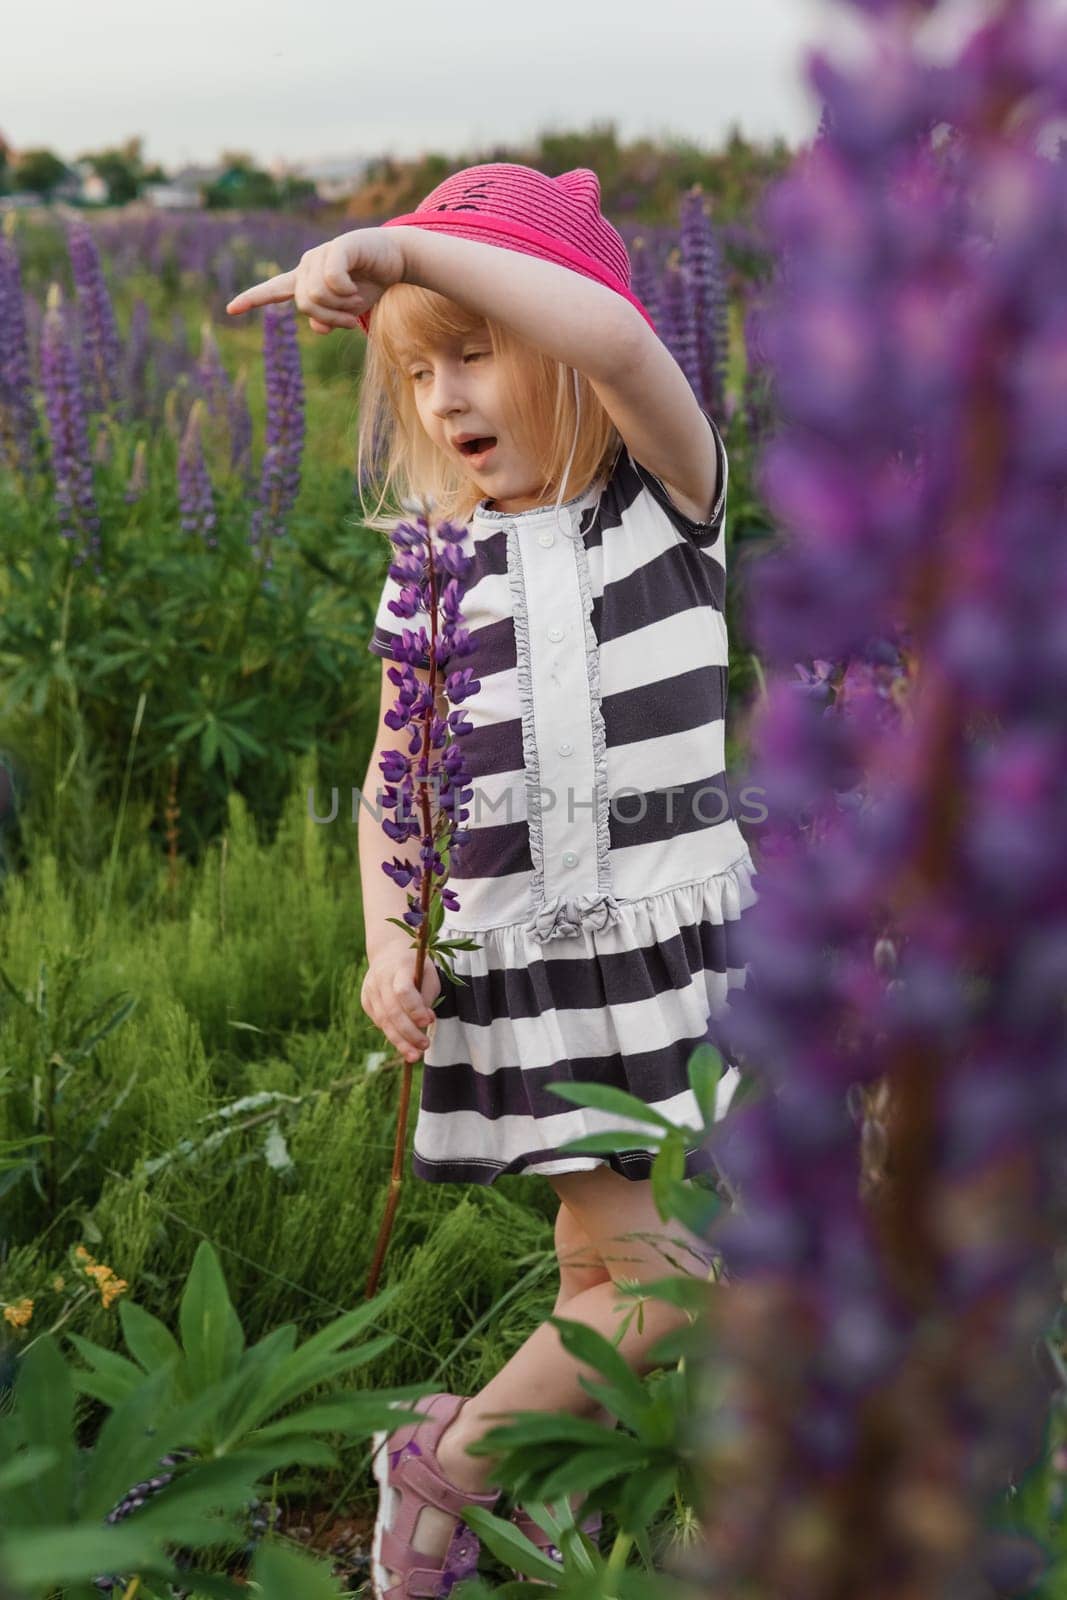 A blonde girl in a field with purple flowers. A little girl in a pink hat is picking flowers in a field. A field with lupines by Annu1tochka